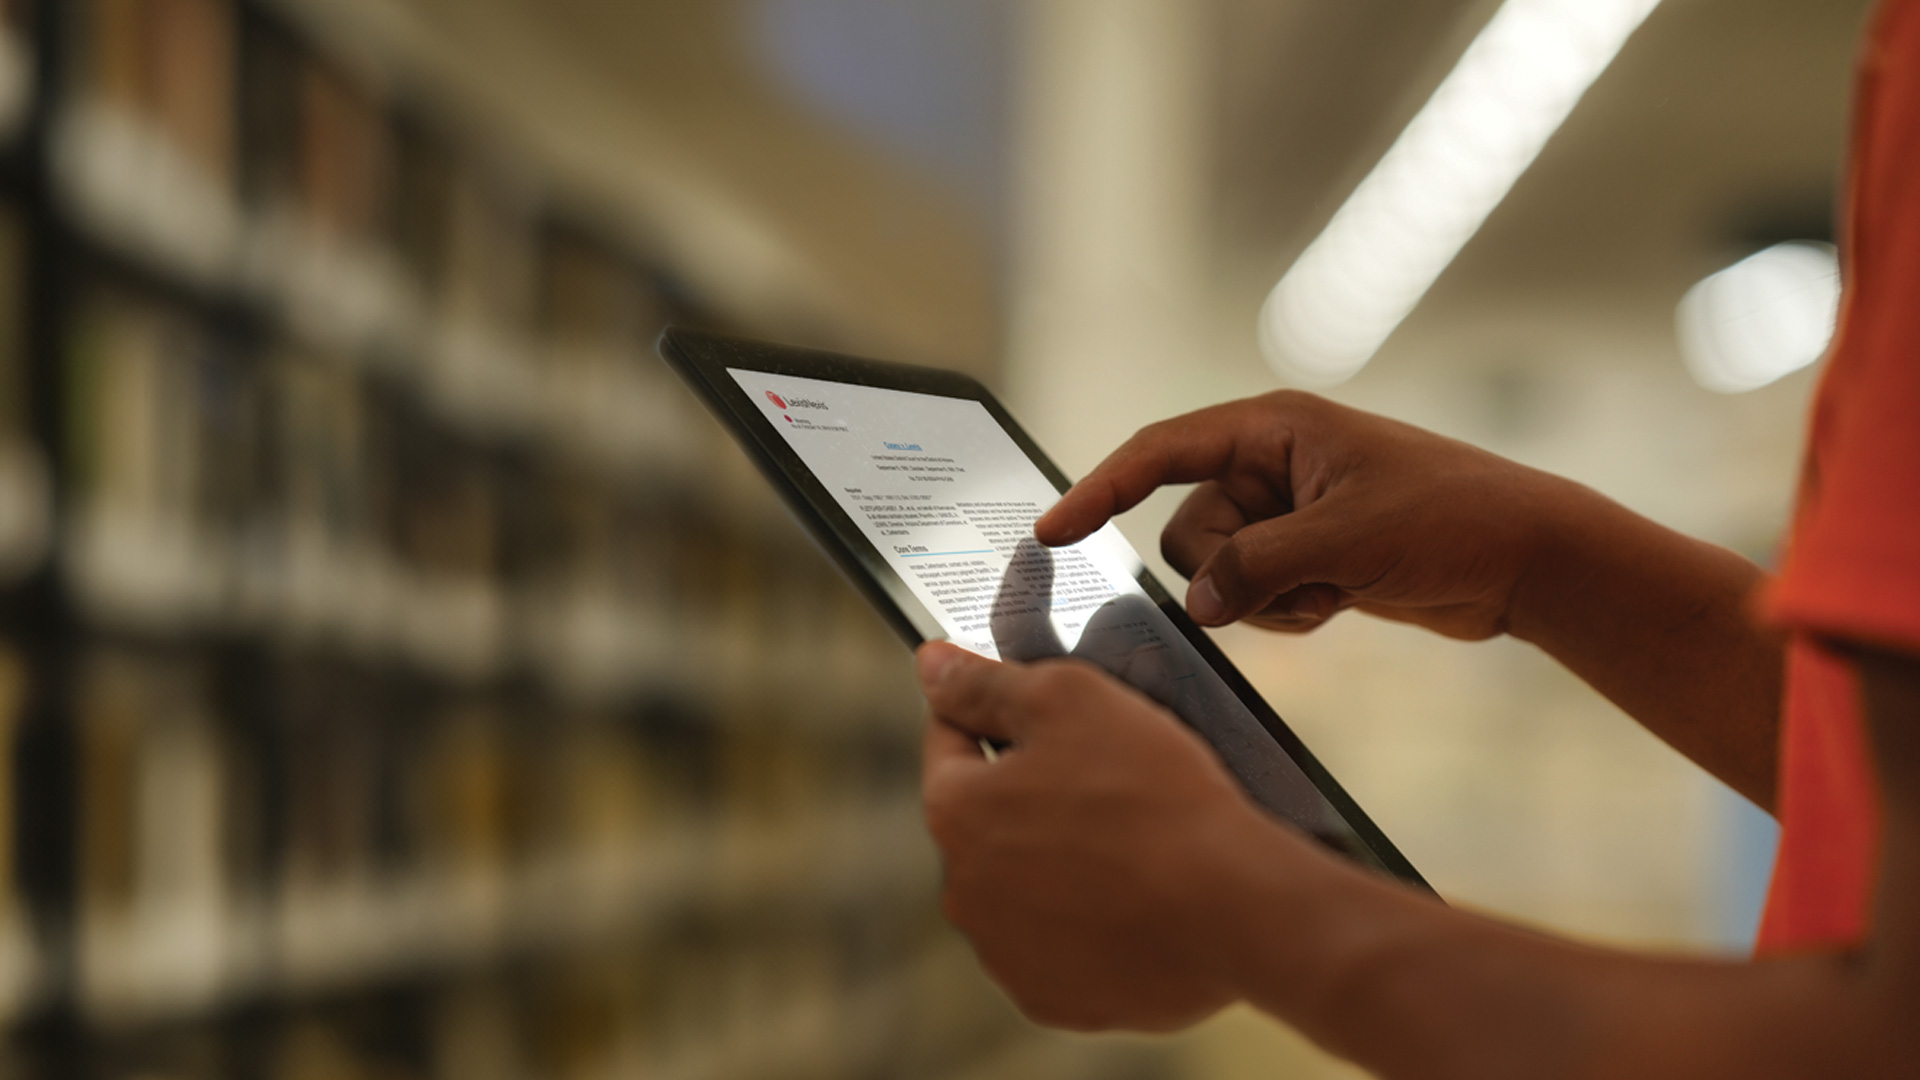 Focused view of a person holding a tablet, featuring the LexisNexis Inmate Law Library interface.